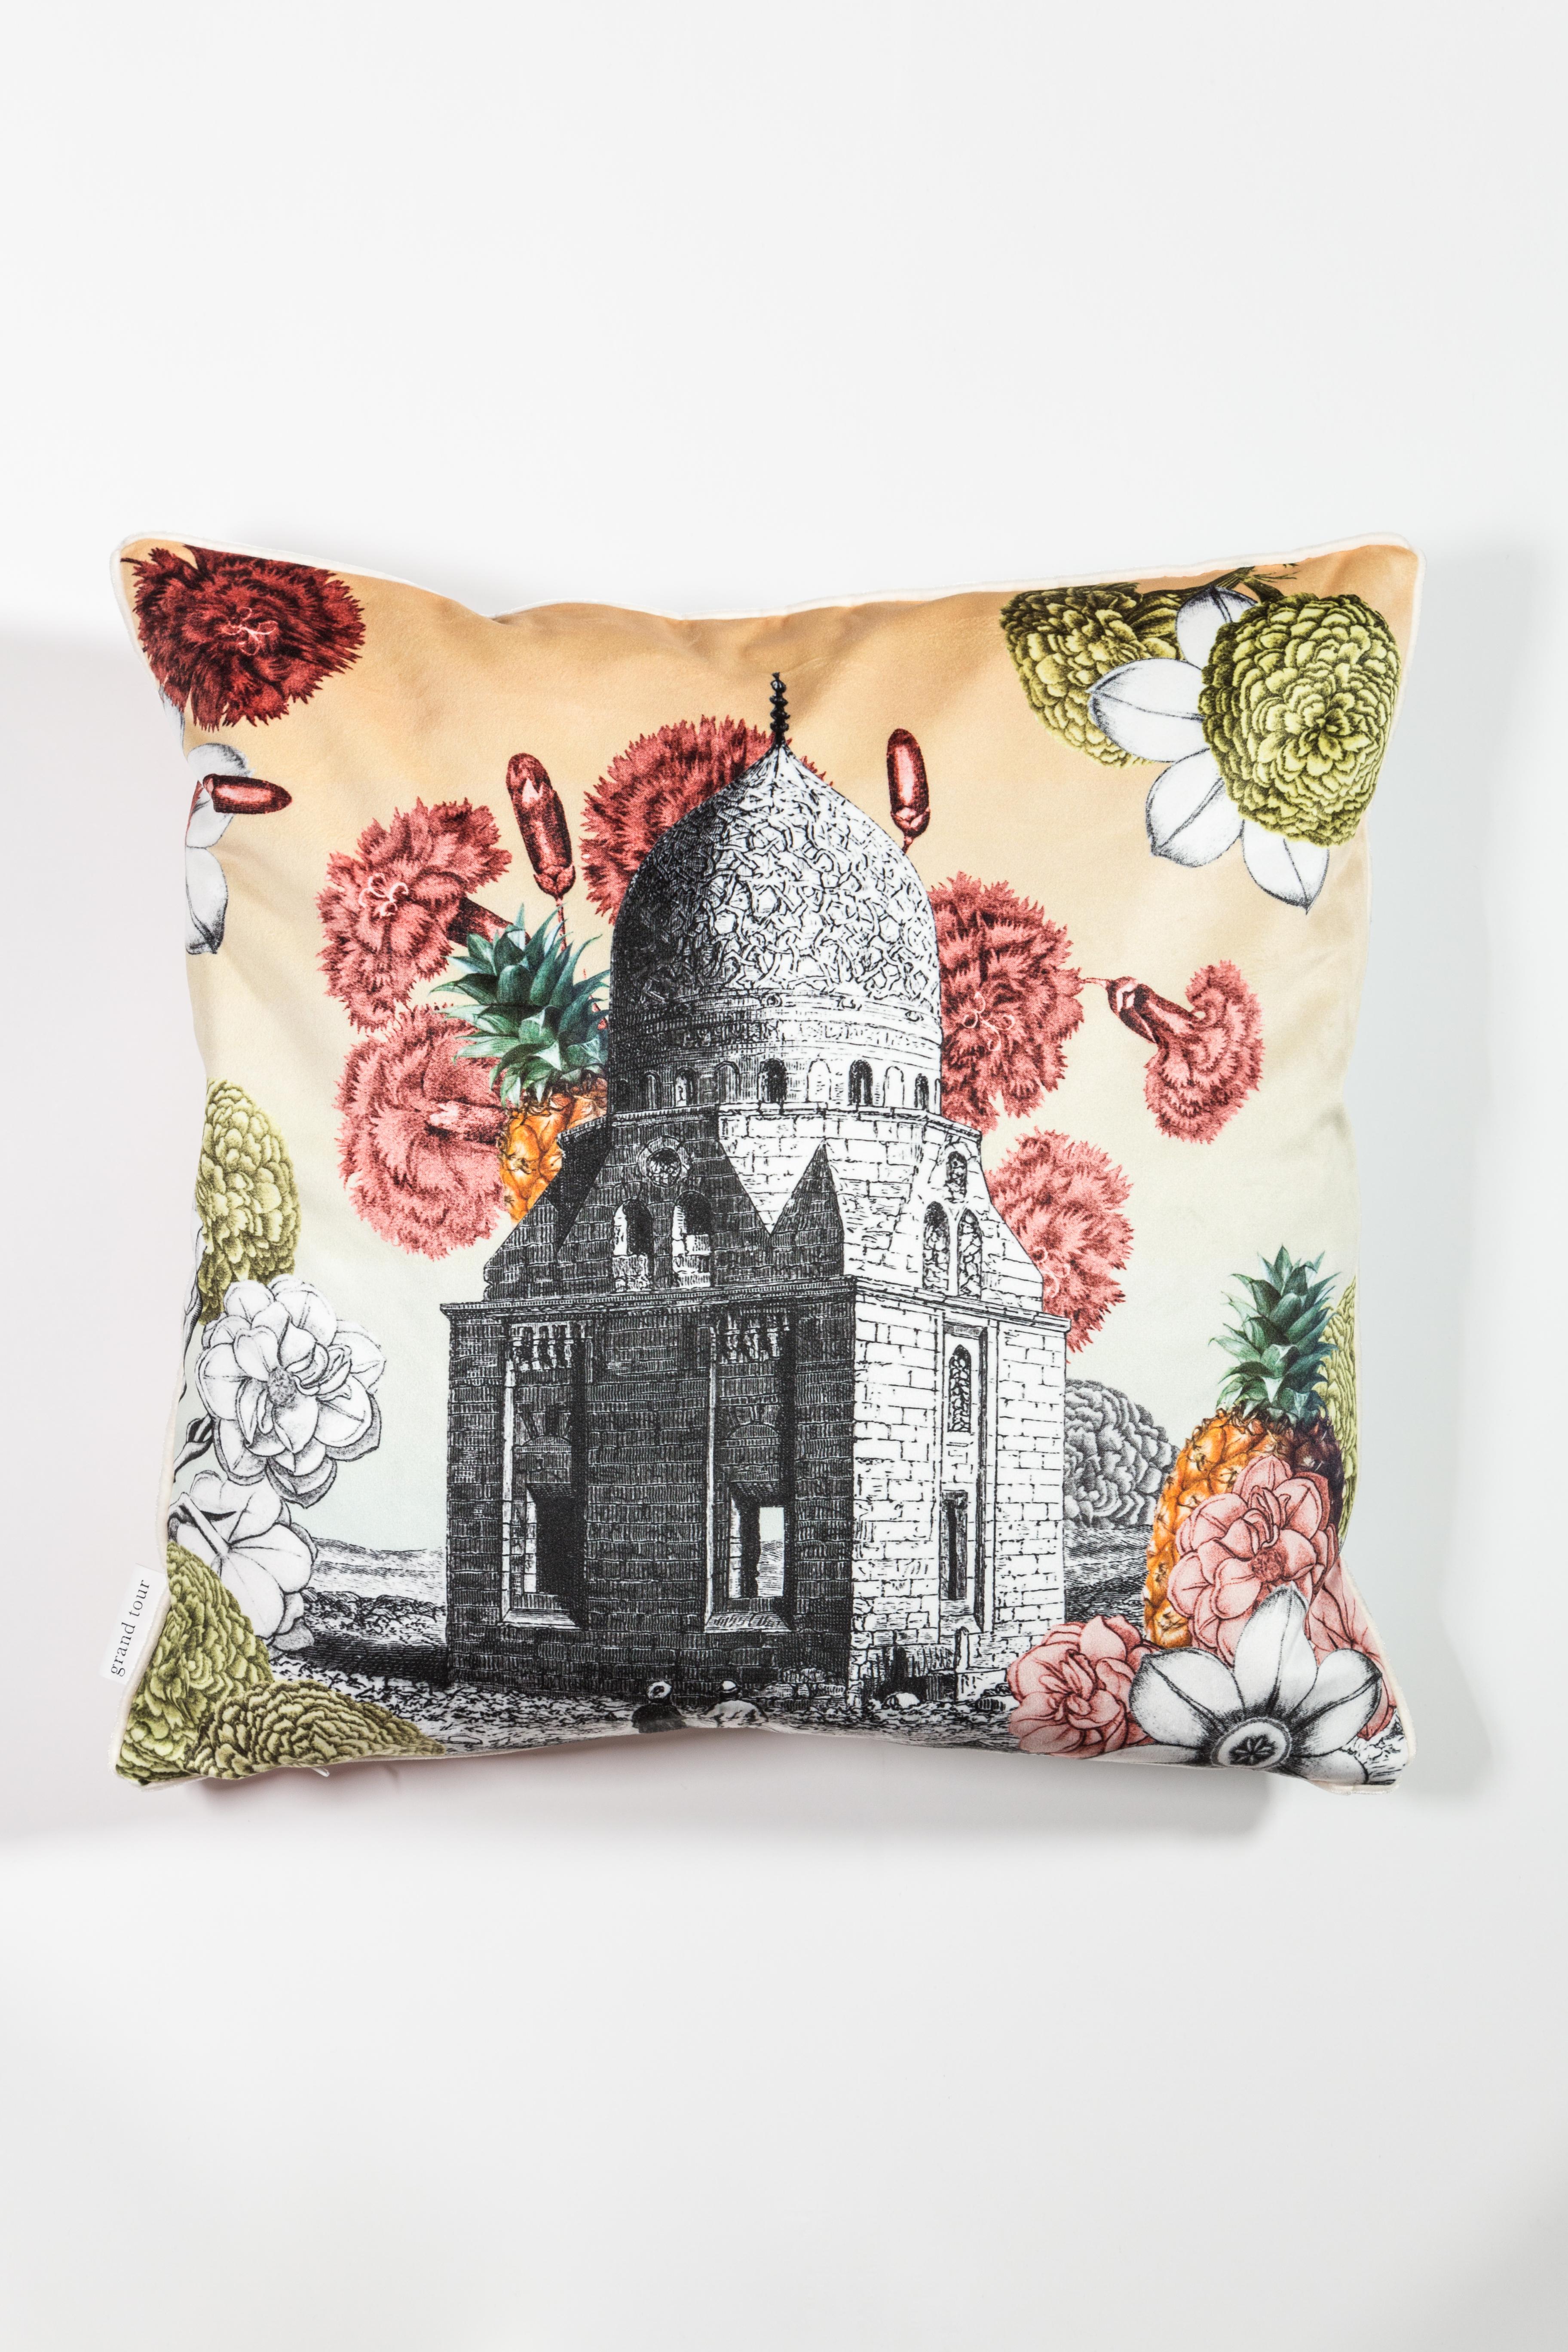 Cairo pillows is a set of cushions that evoke the middle east world with illustrations of architectures and ancient cities from different countries of the Fertile Crescent area. Around the black and white draw, colorful flowers embellish the design.